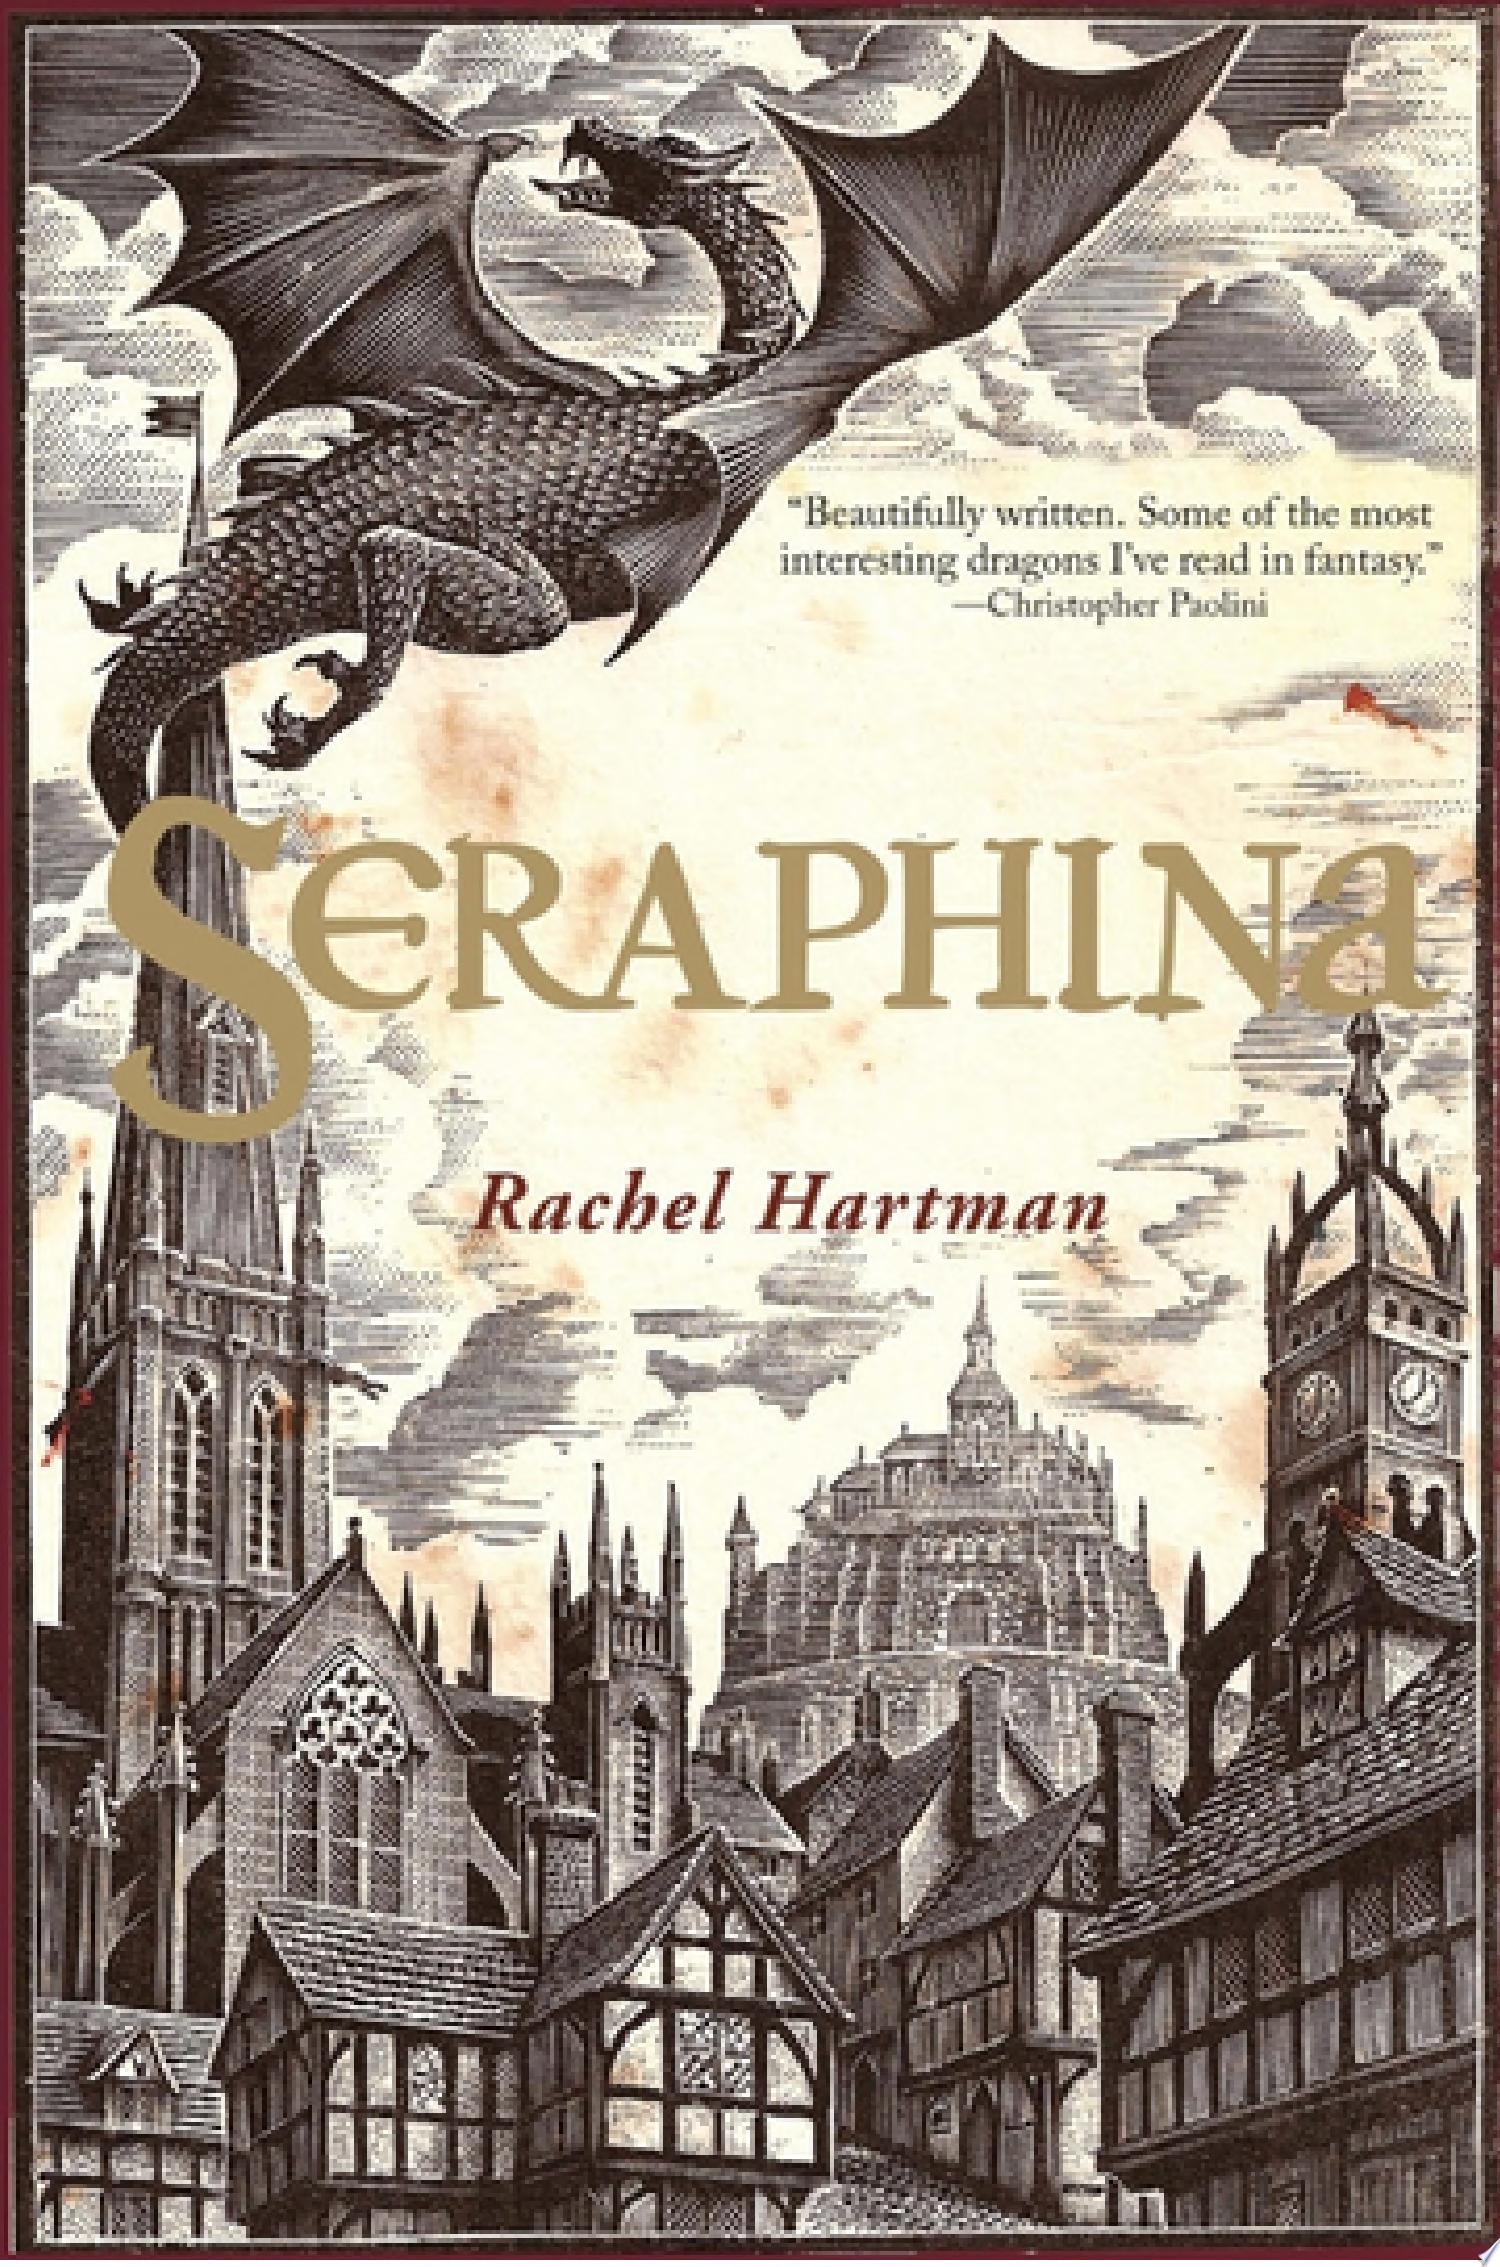 Image for "Seraphina"